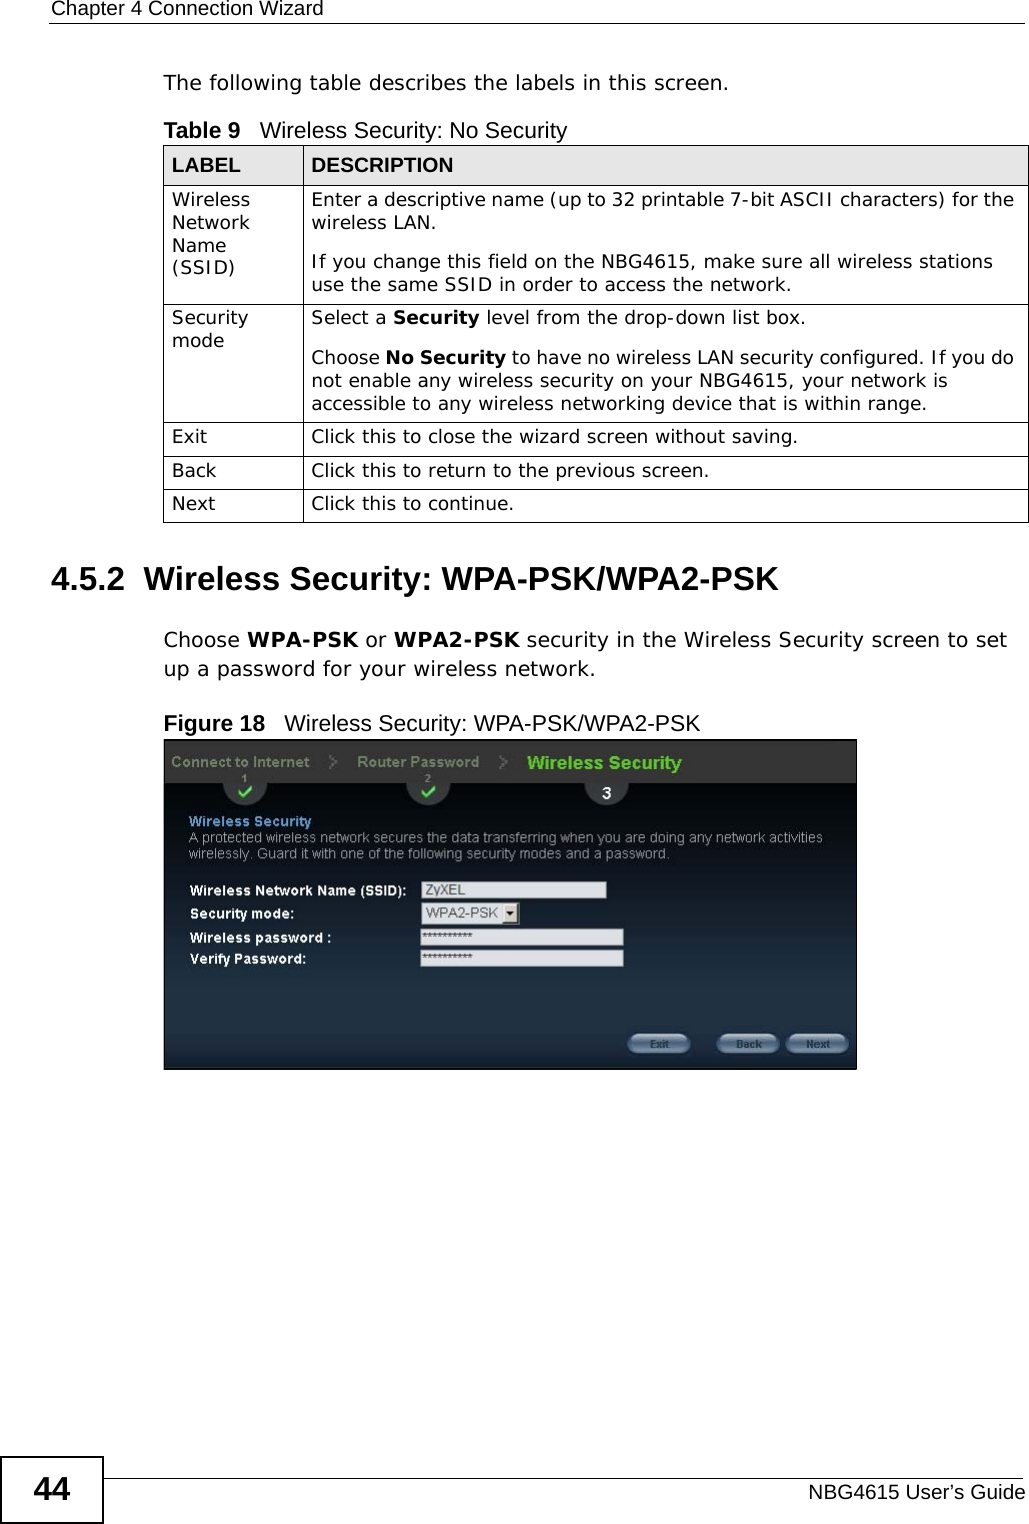 Chapter 4 Connection WizardNBG4615 User’s Guide44The following table describes the labels in this screen.4.5.2  Wireless Security: WPA-PSK/WPA2-PSKChoose WPA-PSK or WPA2-PSK security in the Wireless Security screen to set up a password for your wireless network.Figure 18   Wireless Security: WPA-PSK/WPA2-PSKTable 9   Wireless Security: No SecurityLABEL DESCRIPTIONWireless Network Name (SSID)Enter a descriptive name (up to 32 printable 7-bit ASCII characters) for the wireless LAN. If you change this field on the NBG4615, make sure all wireless stations use the same SSID in order to access the network. Security mode Select a Security level from the drop-down list box. Choose No Security to have no wireless LAN security configured. If you do not enable any wireless security on your NBG4615, your network is accessible to any wireless networking device that is within range. Exit Click this to close the wizard screen without saving.Back Click this to return to the previous screen.Next Click this to continue. 